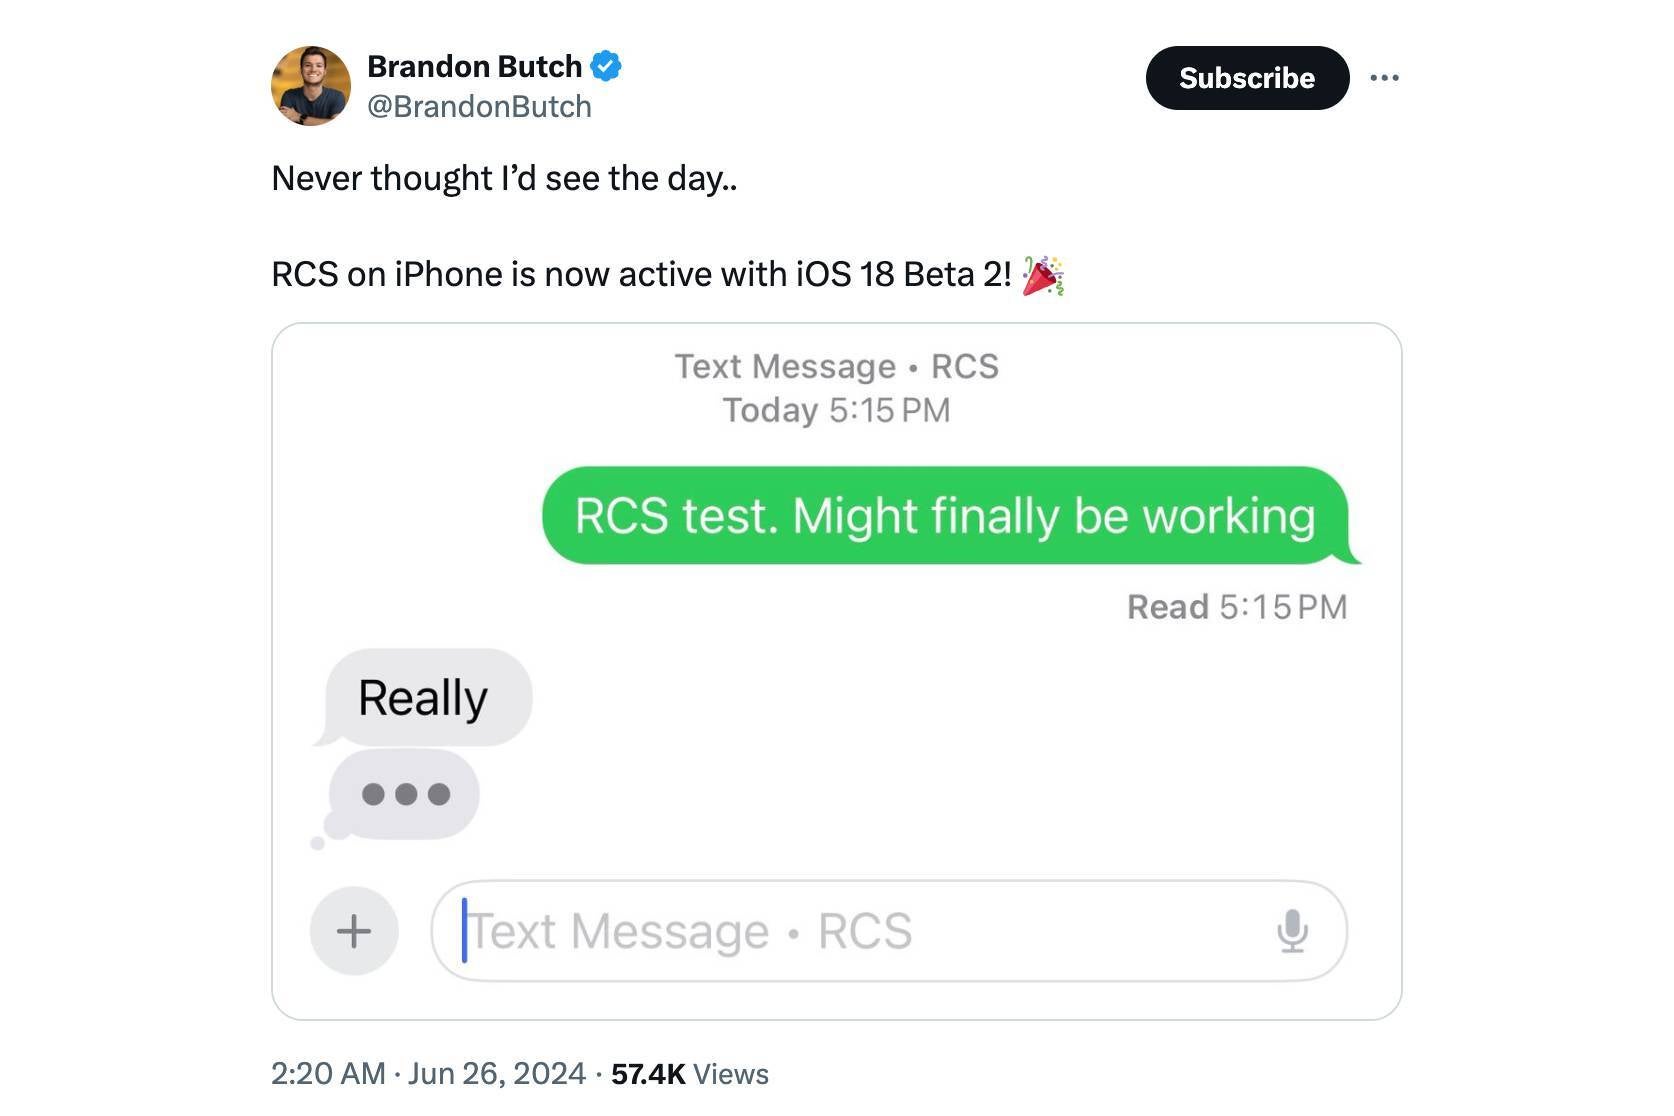 Some iPhone users were delighted to find that RCS support has been enabled by their carrier - RCS messaging has been enabled for some iPhone users